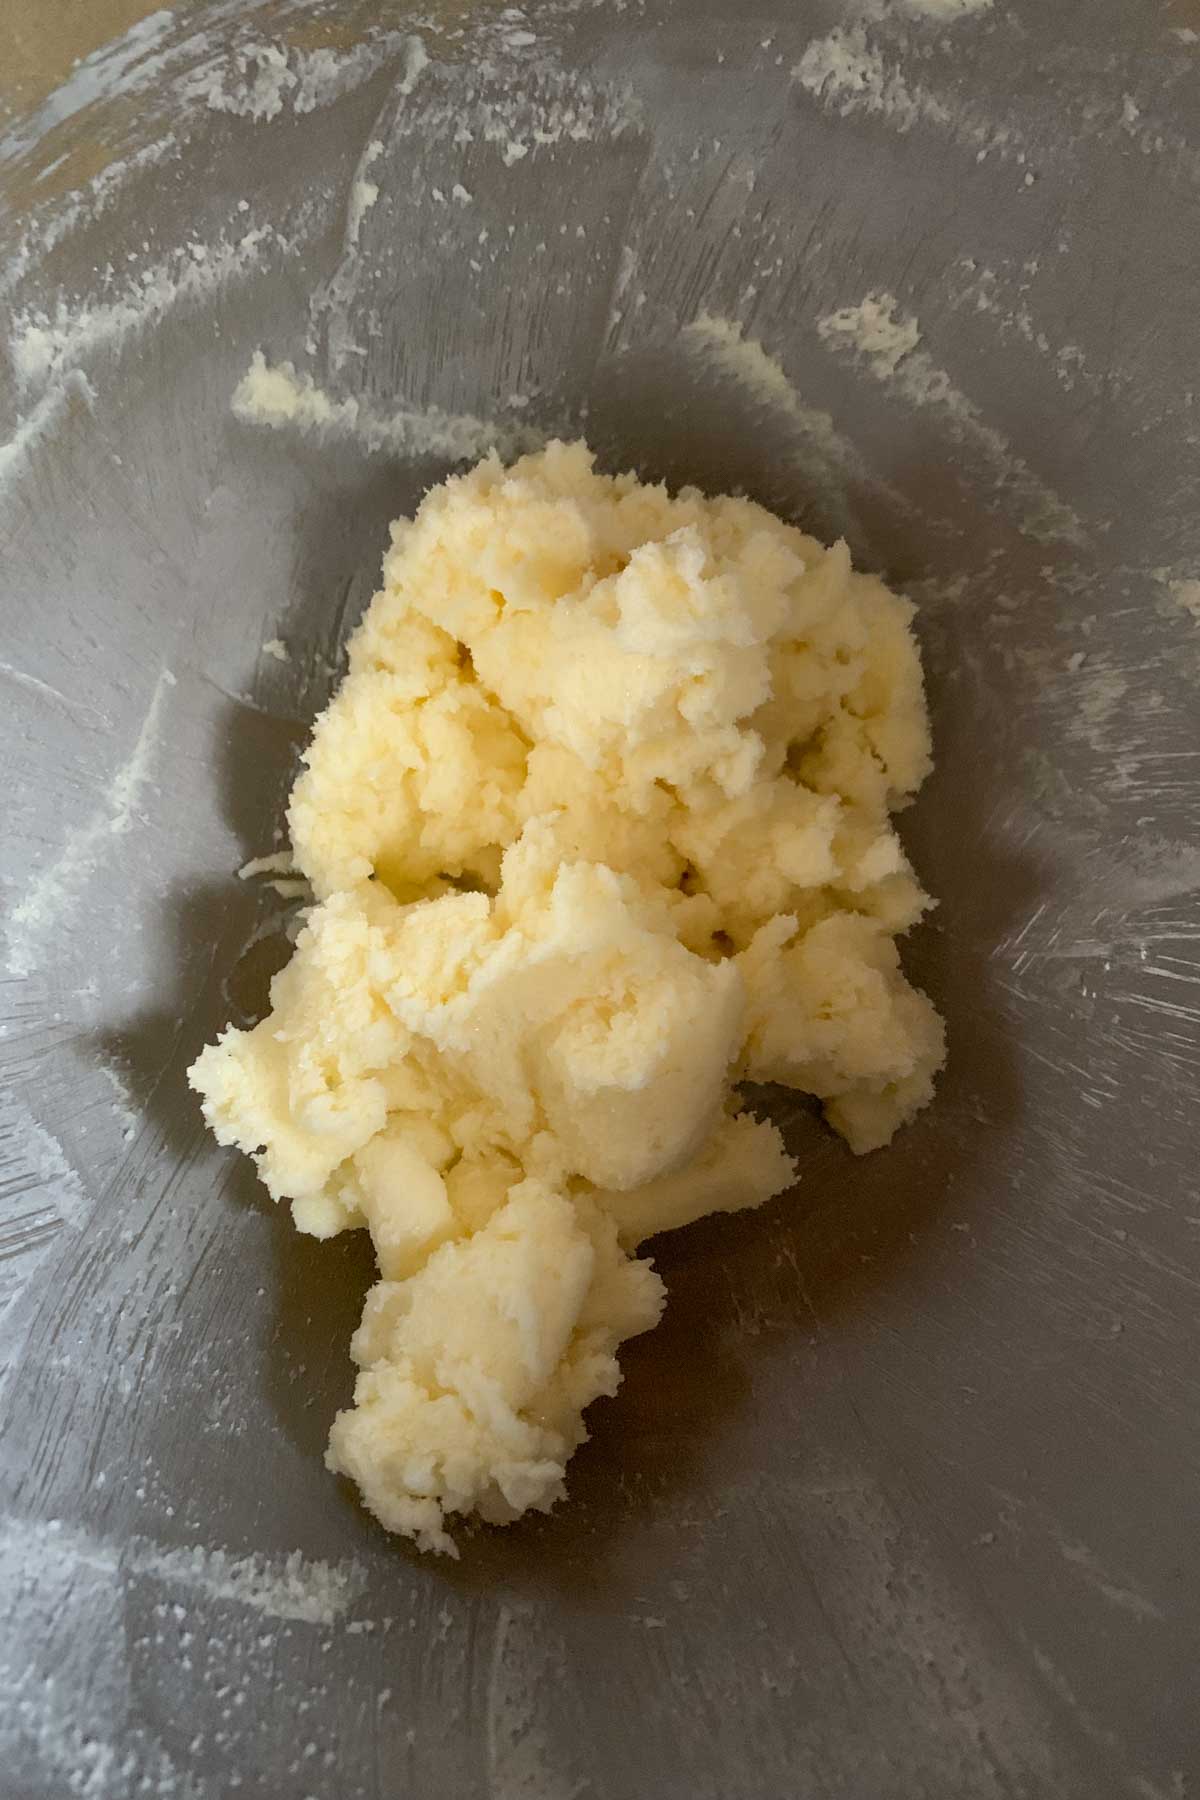 Butter and sugar creamed together in mixing bowl.